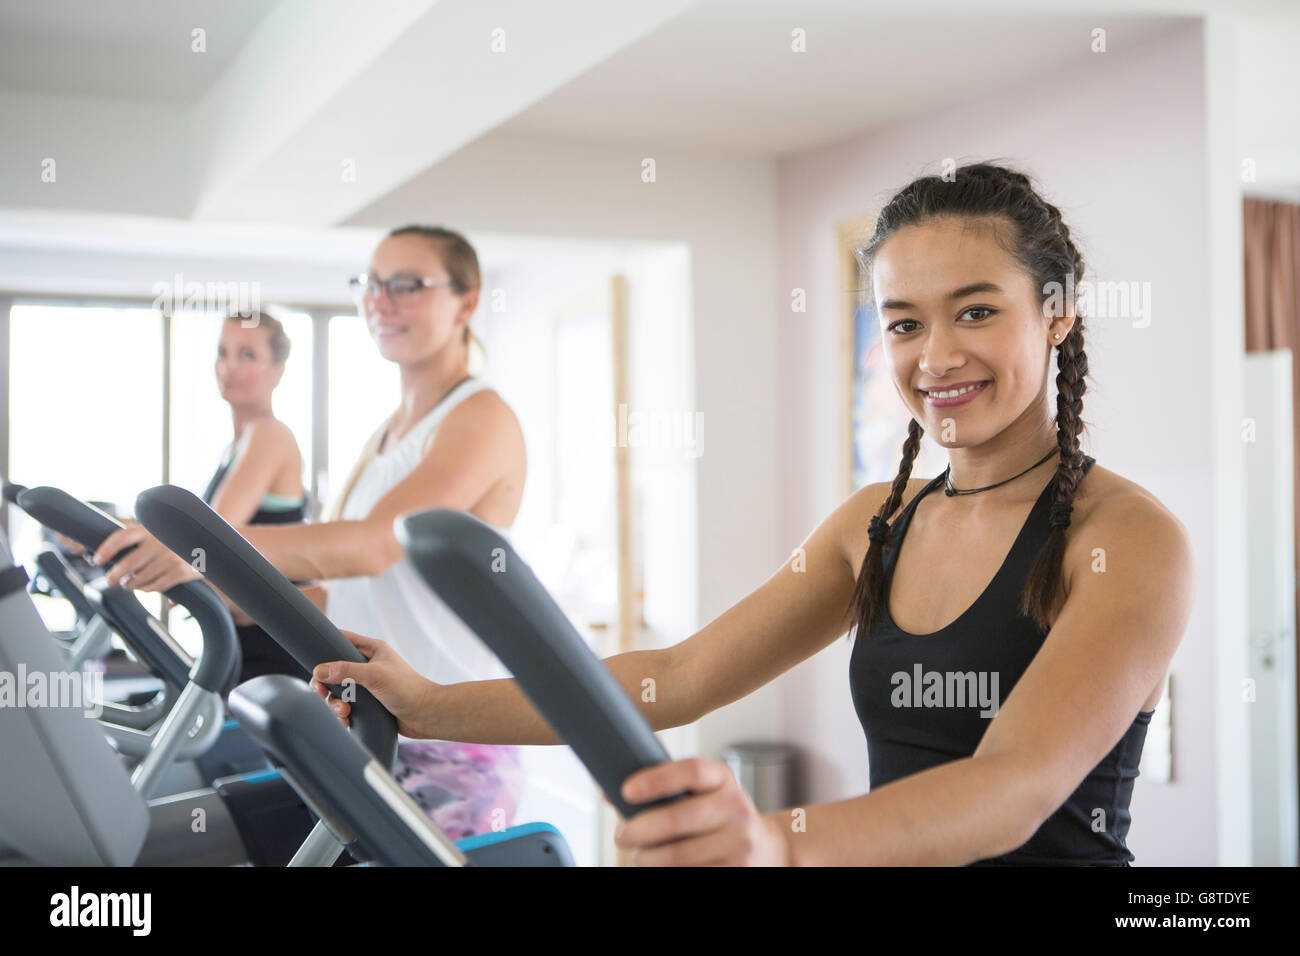 Women exercising on cross trainer in health club Stock Photo